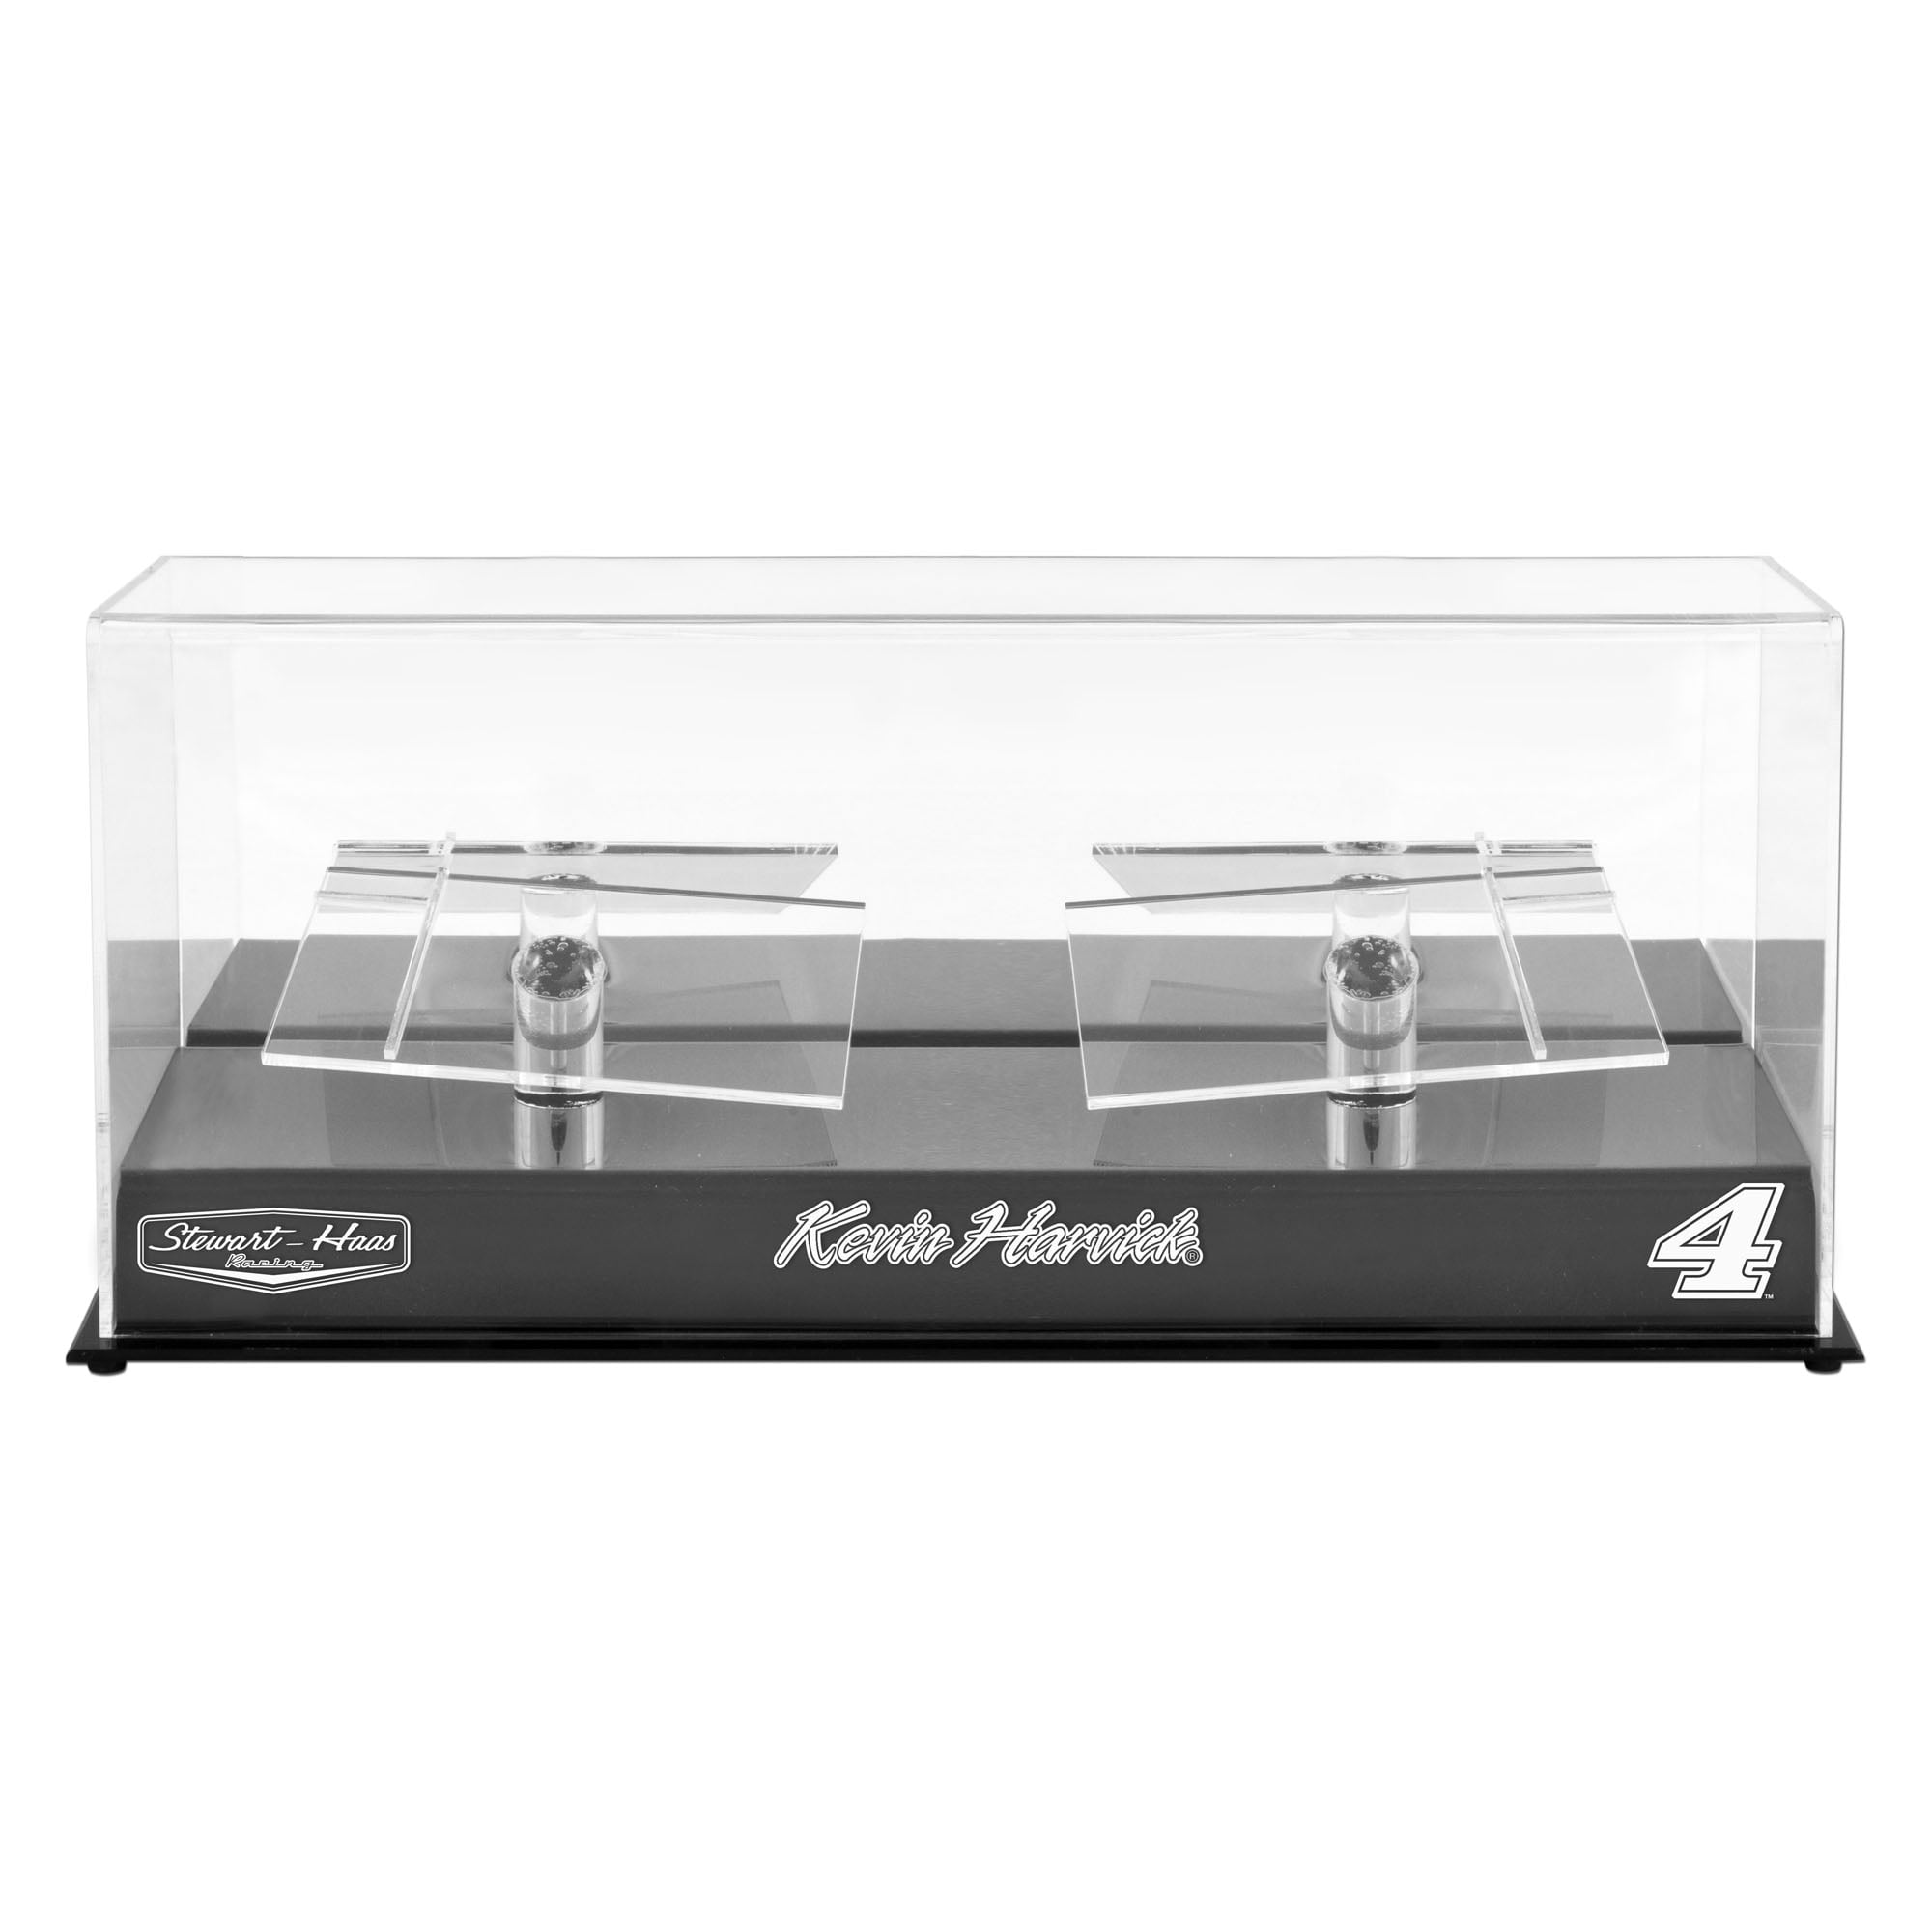 Kevin Harvick Fanatics Authentic #4 Stewart-Haas Racing 2 Car 1/24 Scale Die Cast Display Case With Platforms - No Size